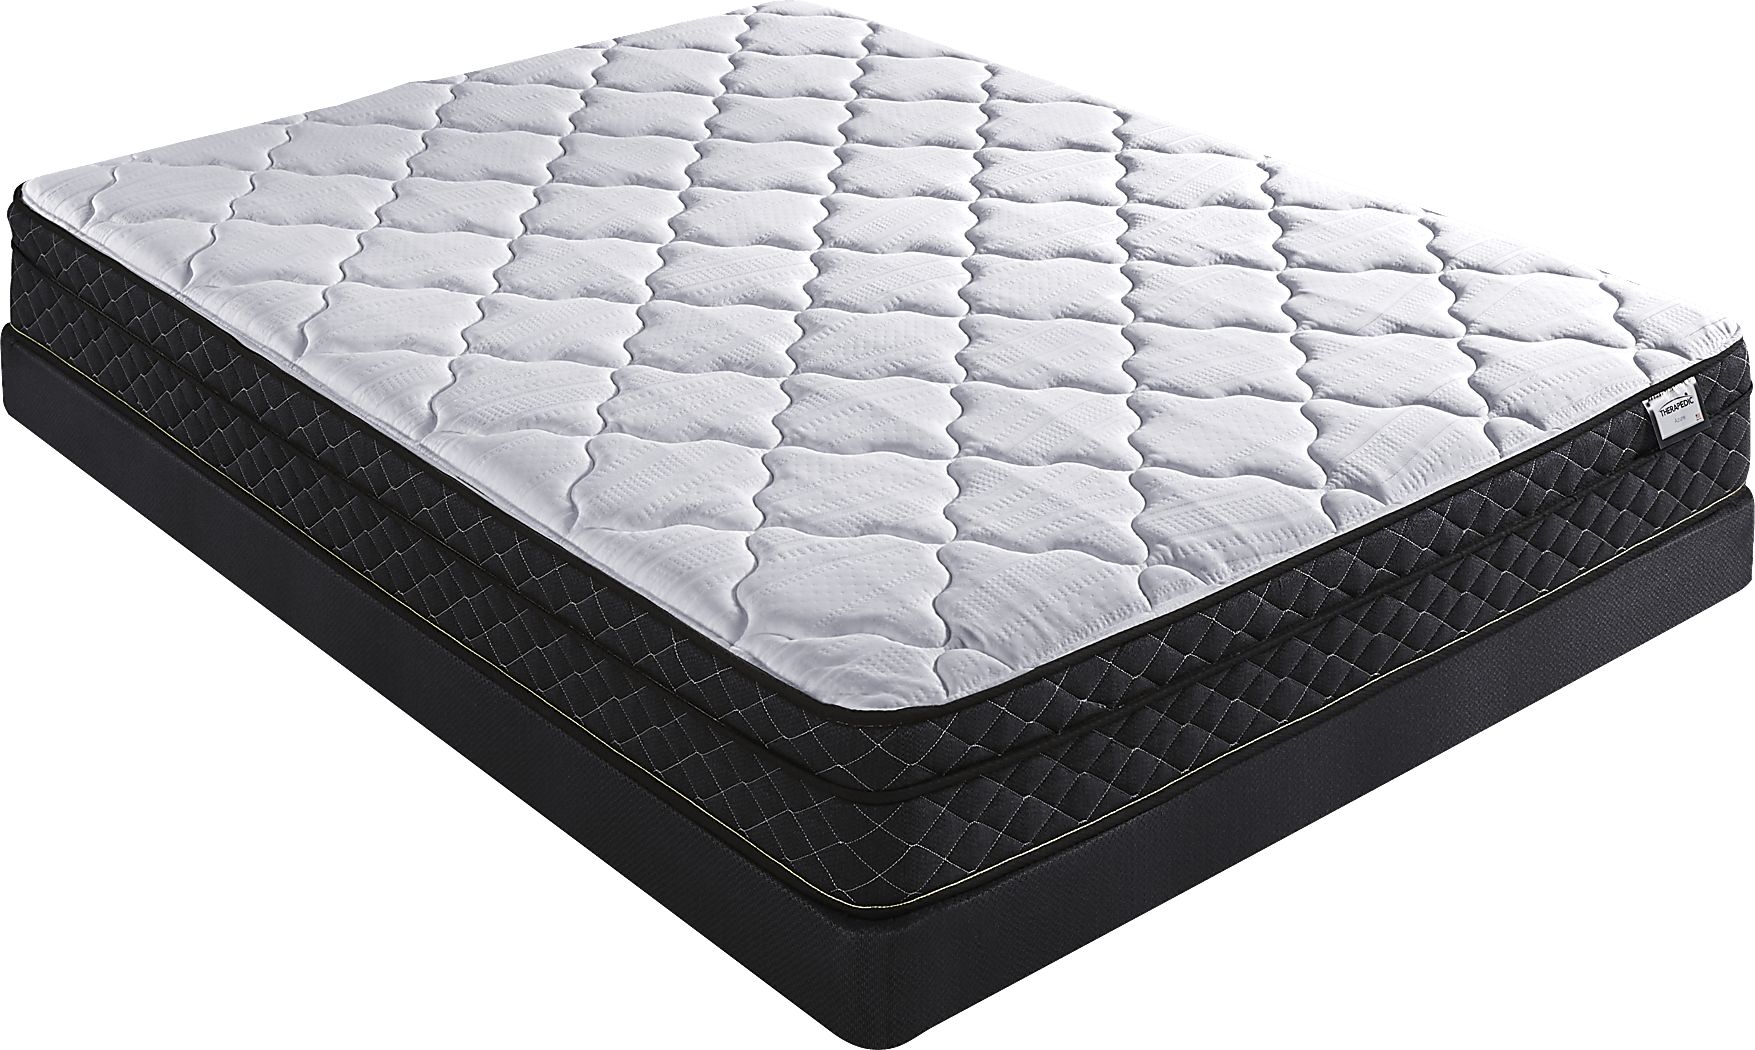 are low profile queen mattress uncomfortable